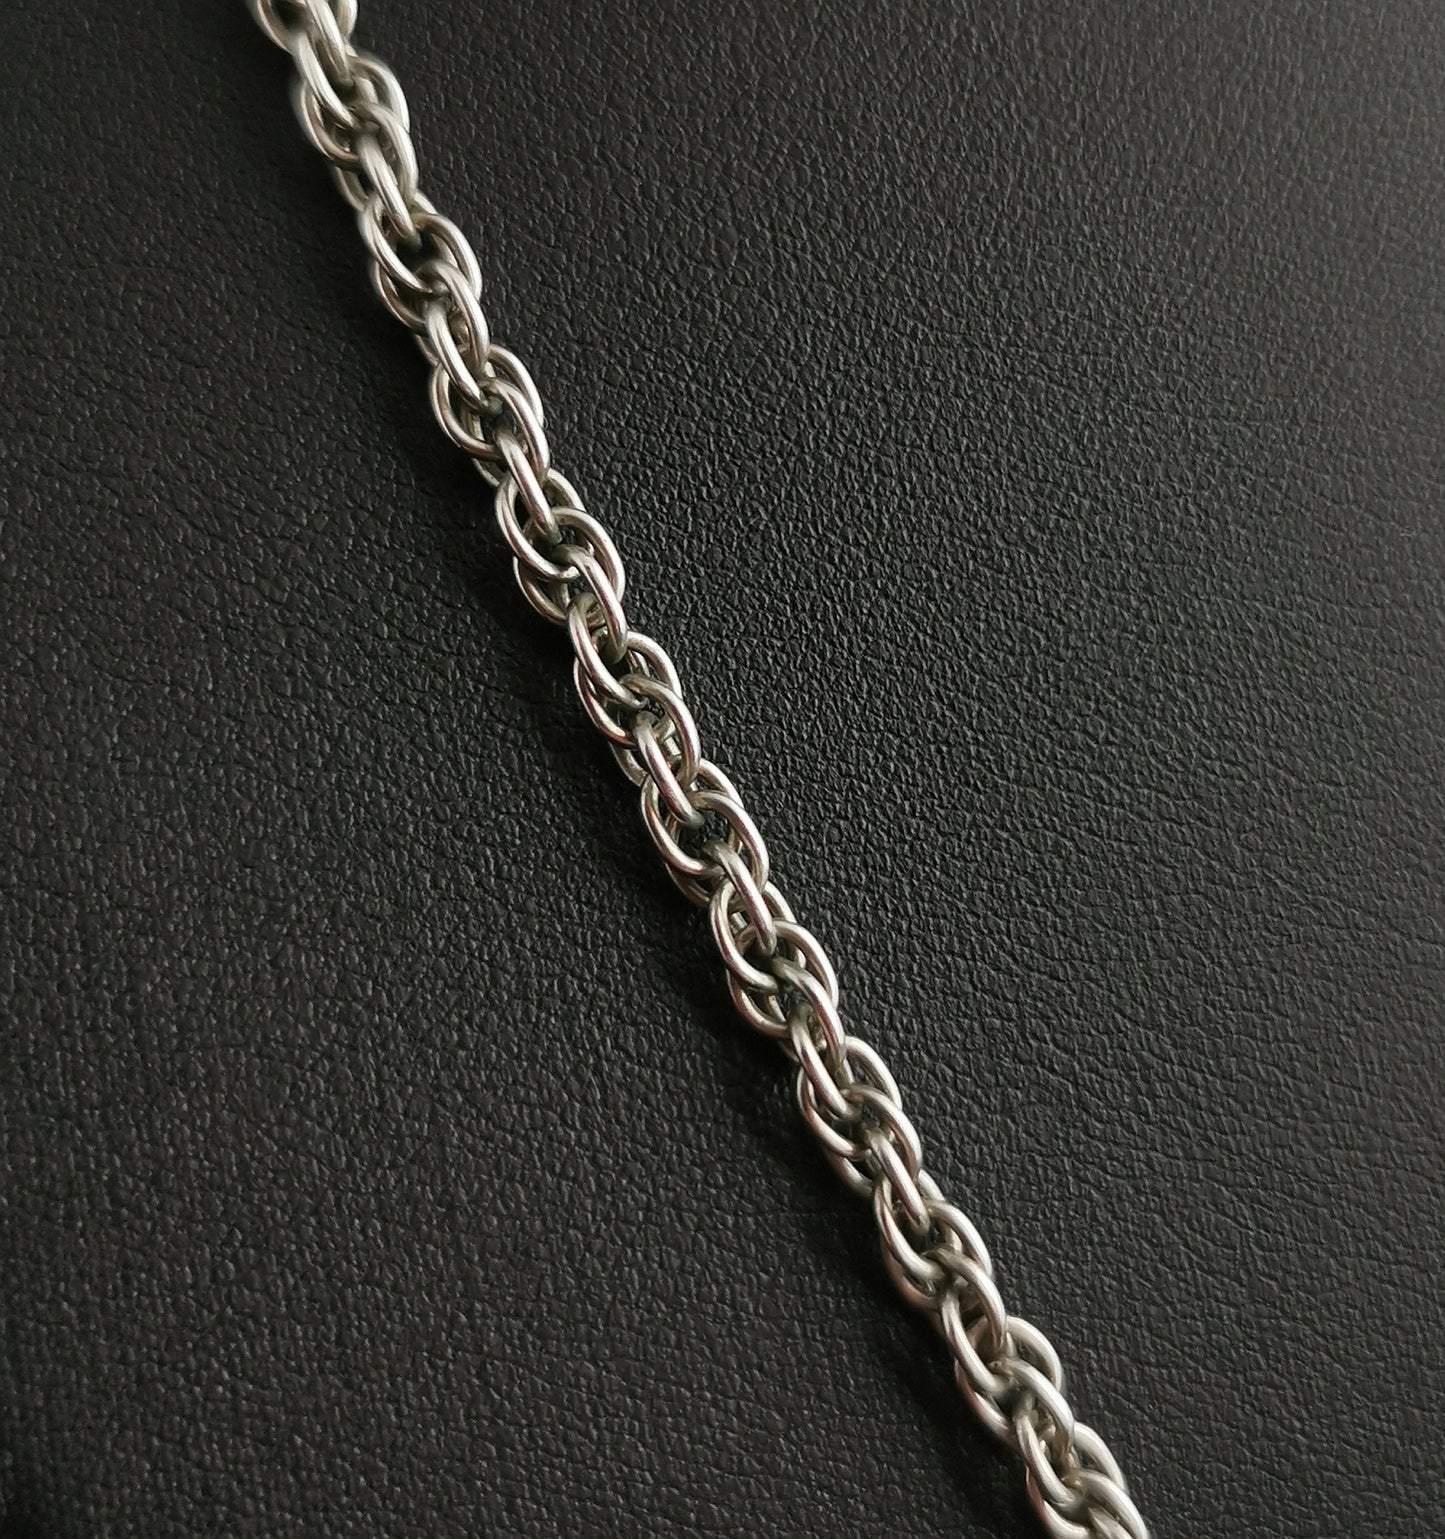 Vintage Art Deco sterling silver, fancy rope link chain necklace